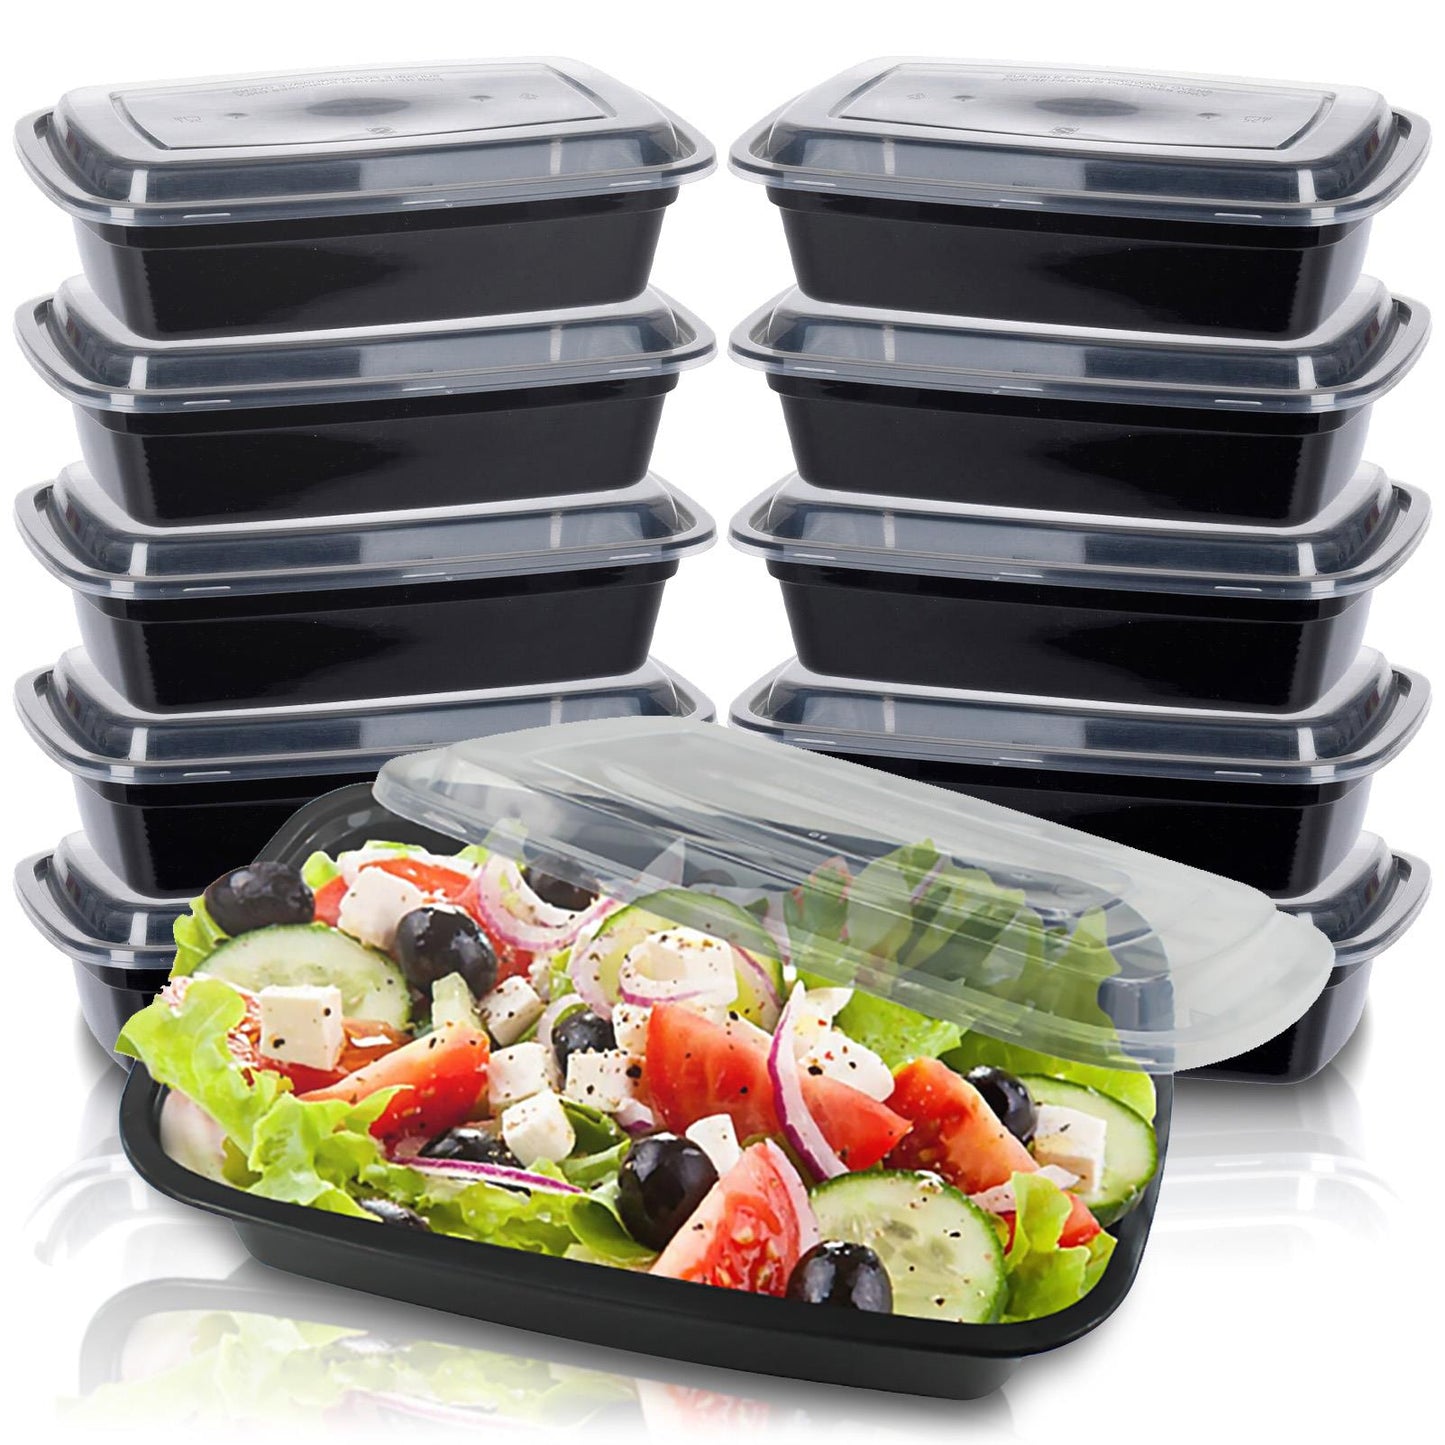 Meal Prep Food Storage with 1 Compartment by Geezy - UKBuyZone